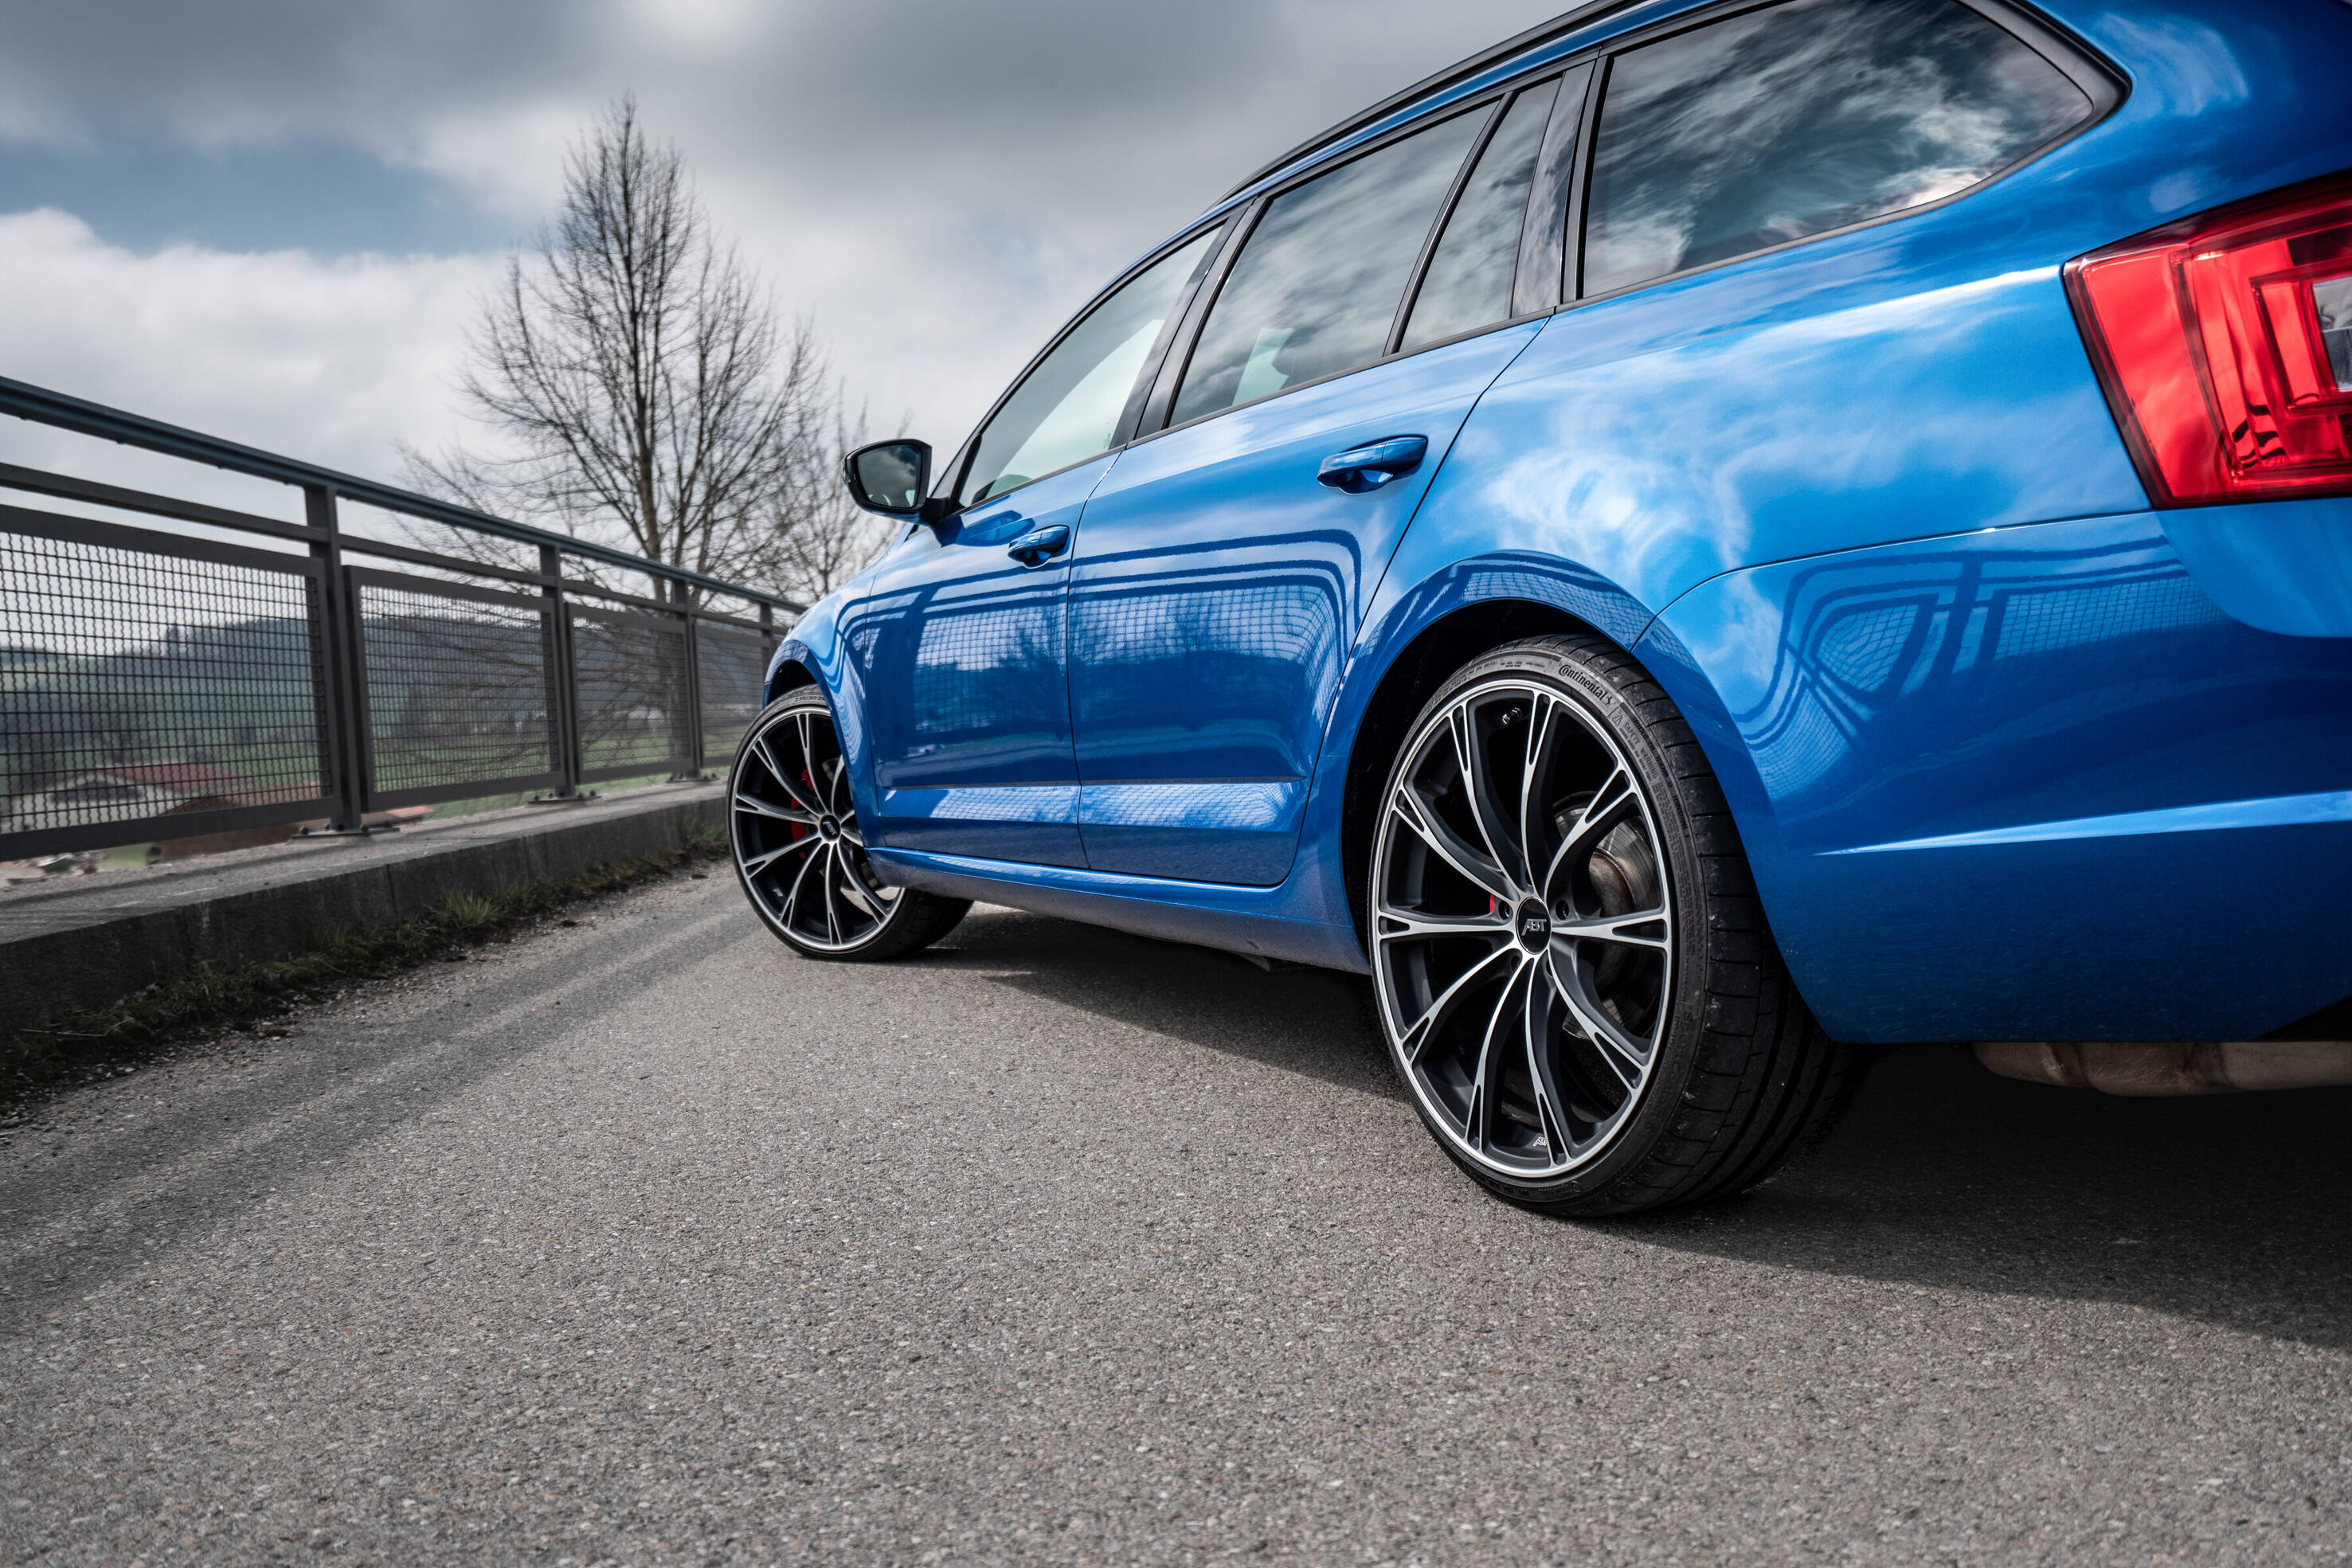 290 HP and new suspension kits: perfect drive for the Skoda